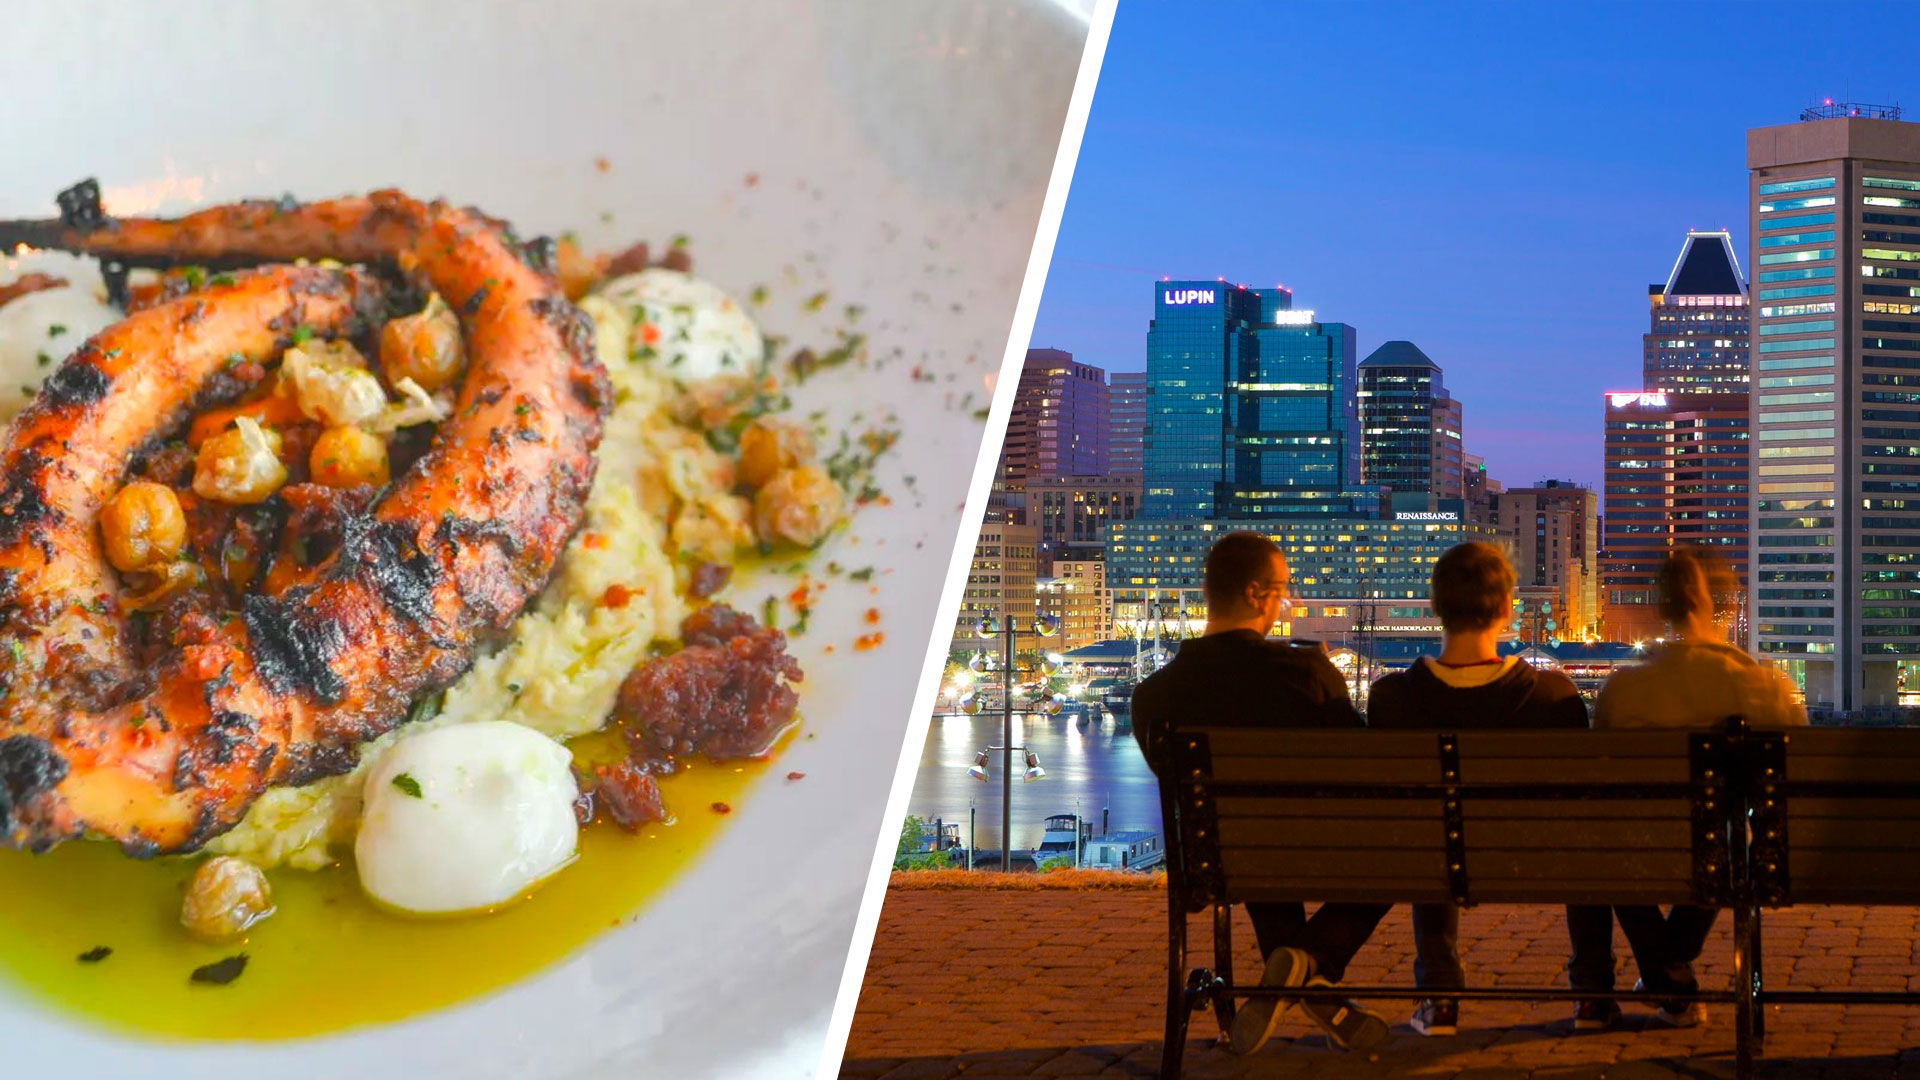 Baltimore Winter Restaurant Week Eat Like a Tourist Pairing - Rusty Scupper and Federal Hill Park